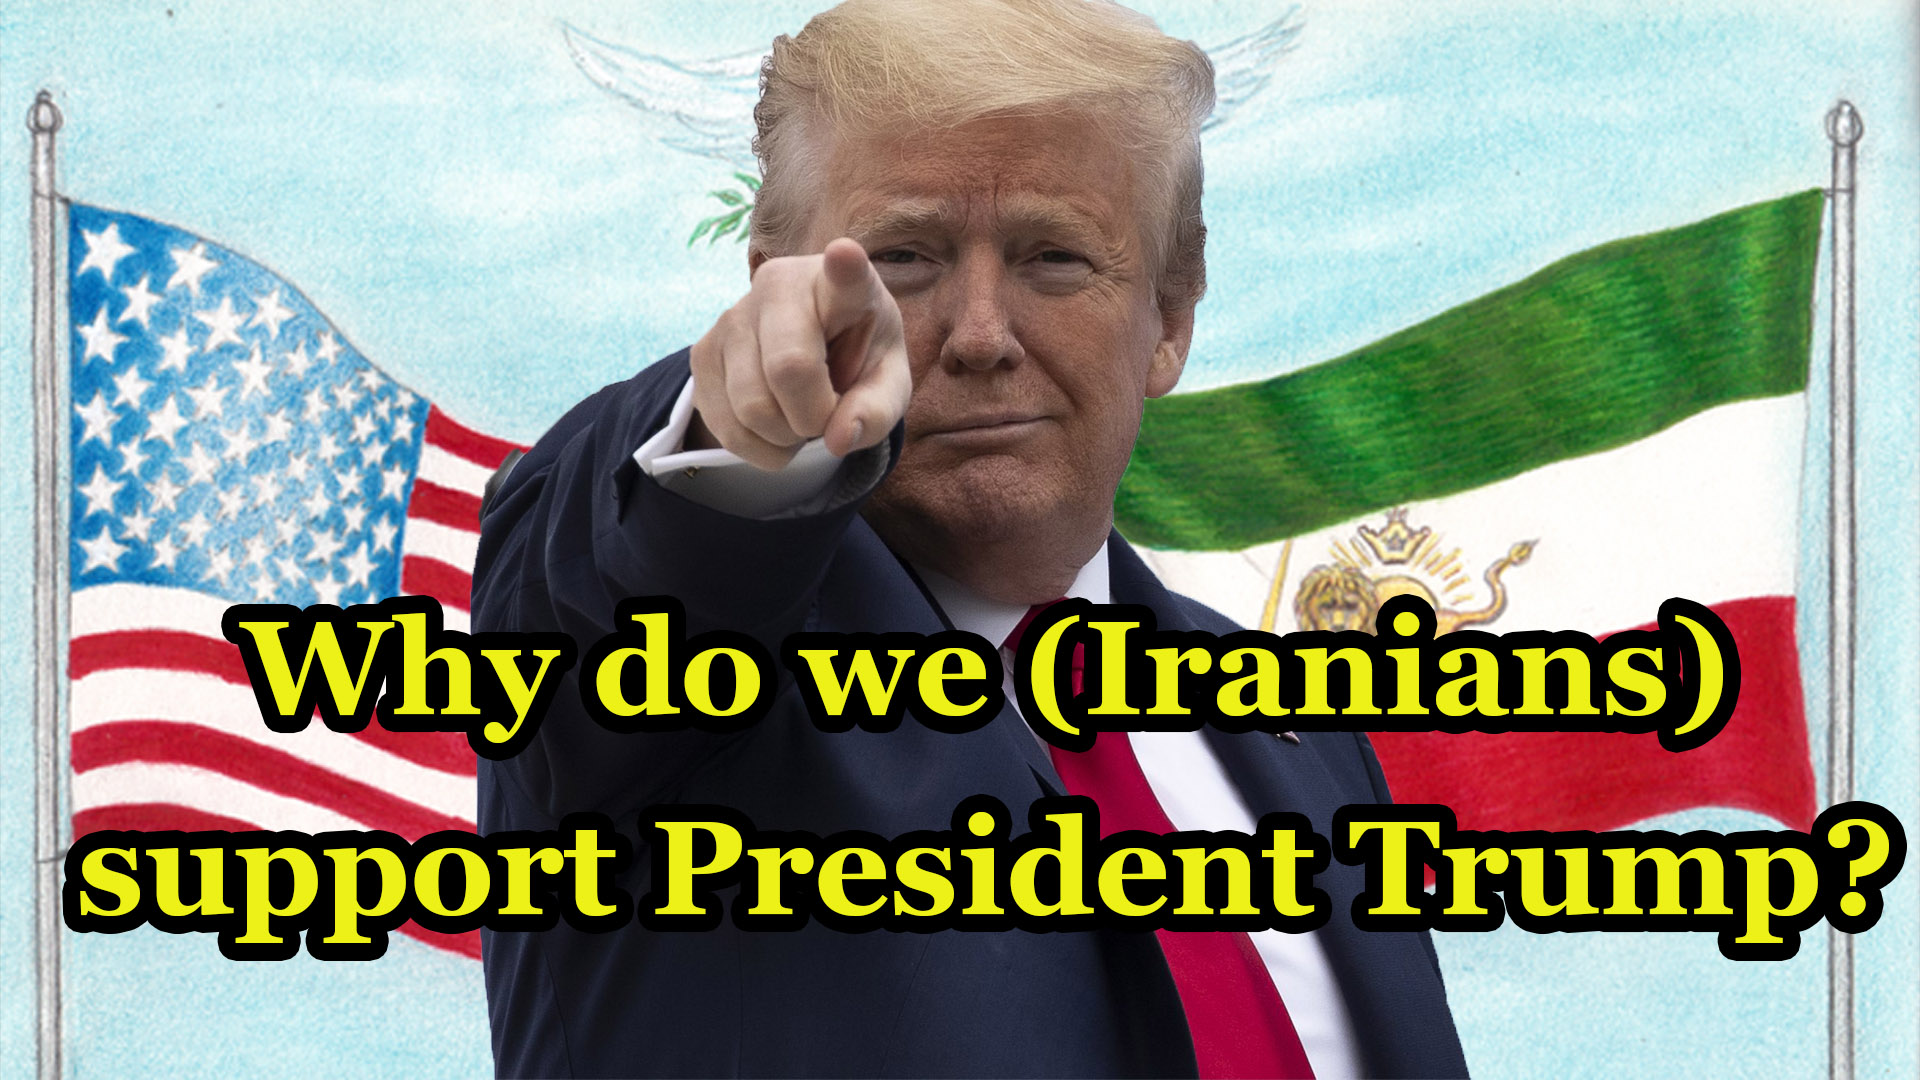 Why do we (Iranians) support President Trump?